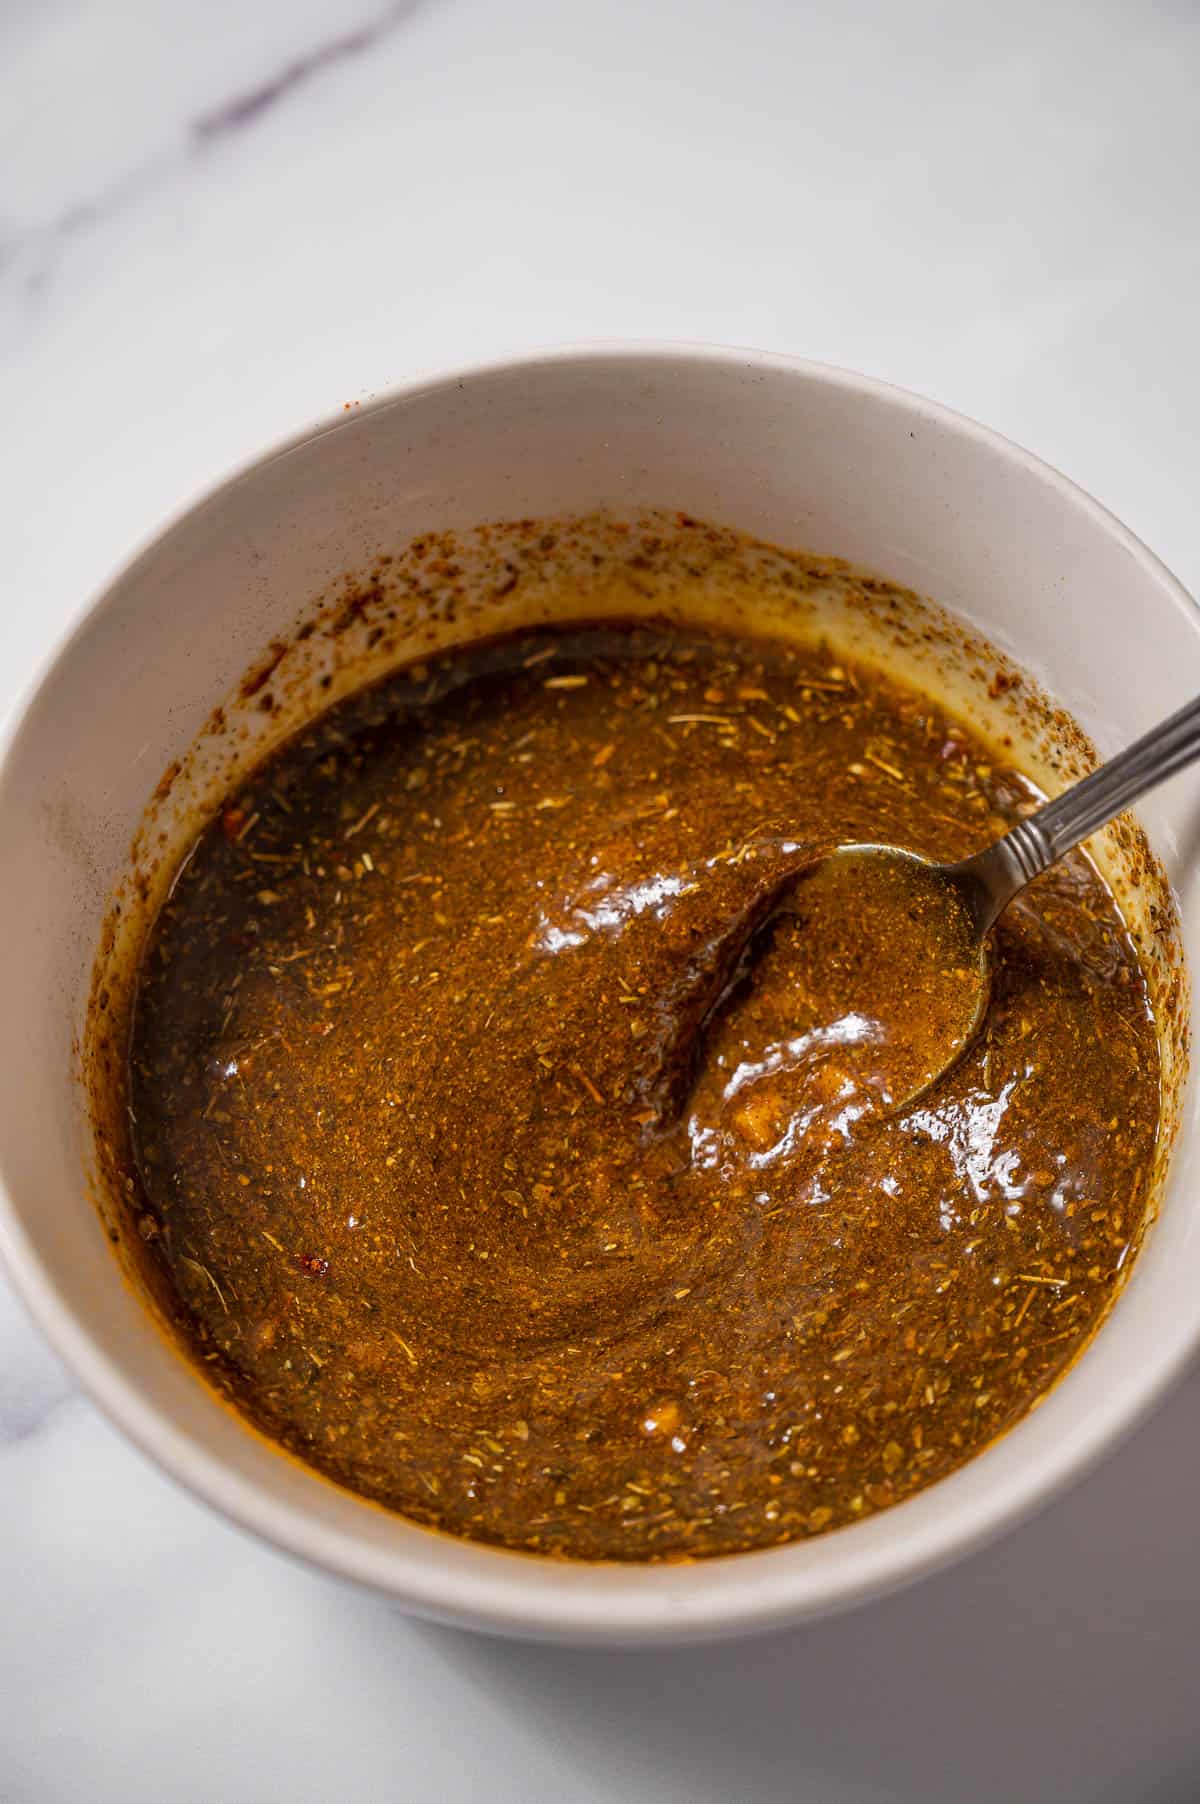 Ras el hanout marinade in a white bowl with a metal spoon